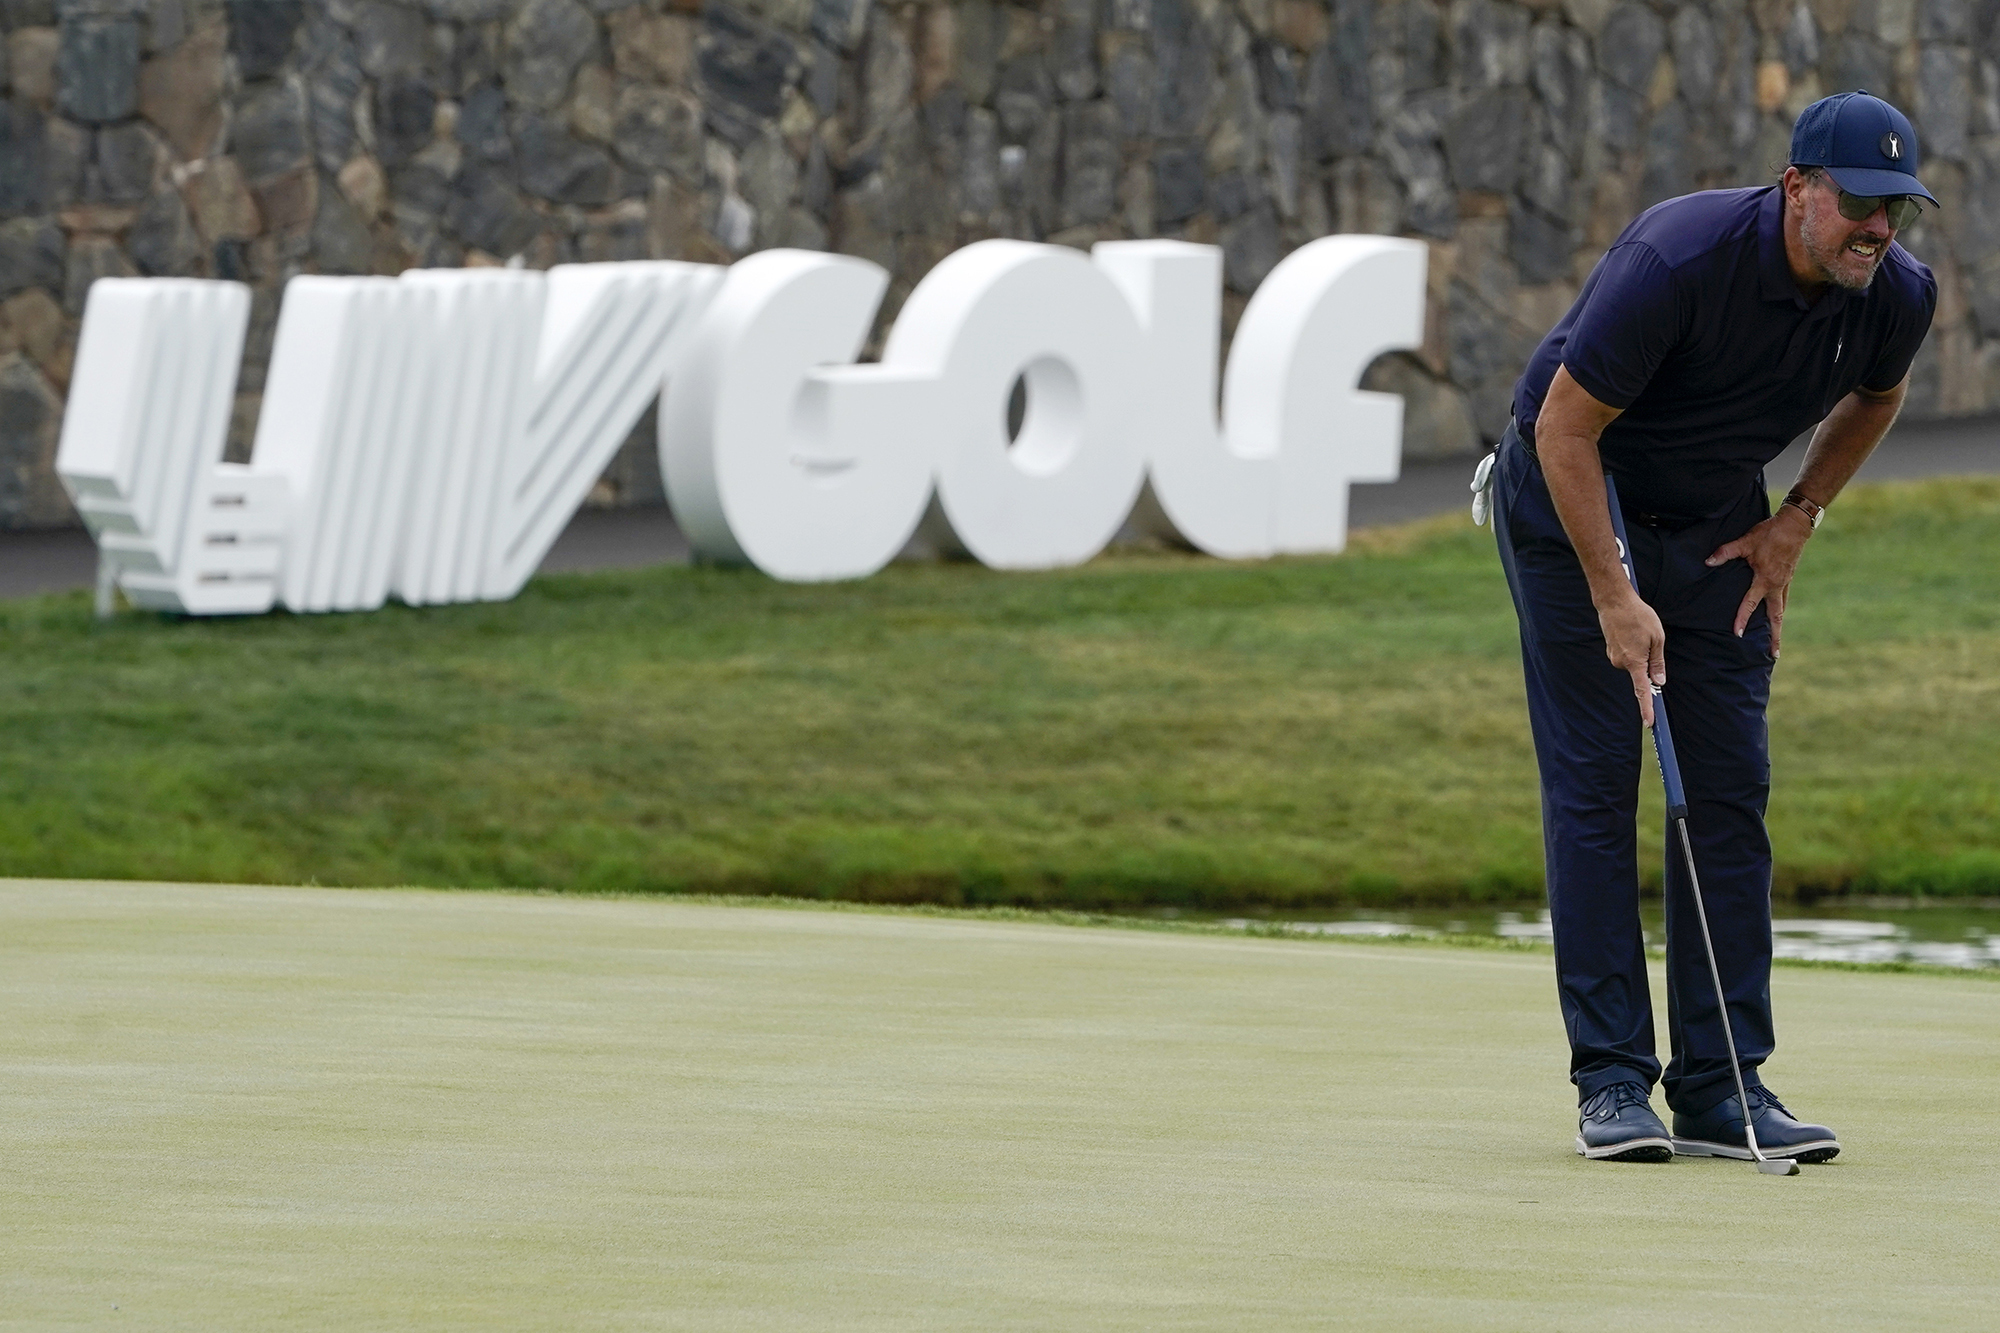 Golfer Phil Mickelson holds a golf club standing on grass and looks into the distance, bending at the waist, in front of a LIV Golf sign and a rock wall.